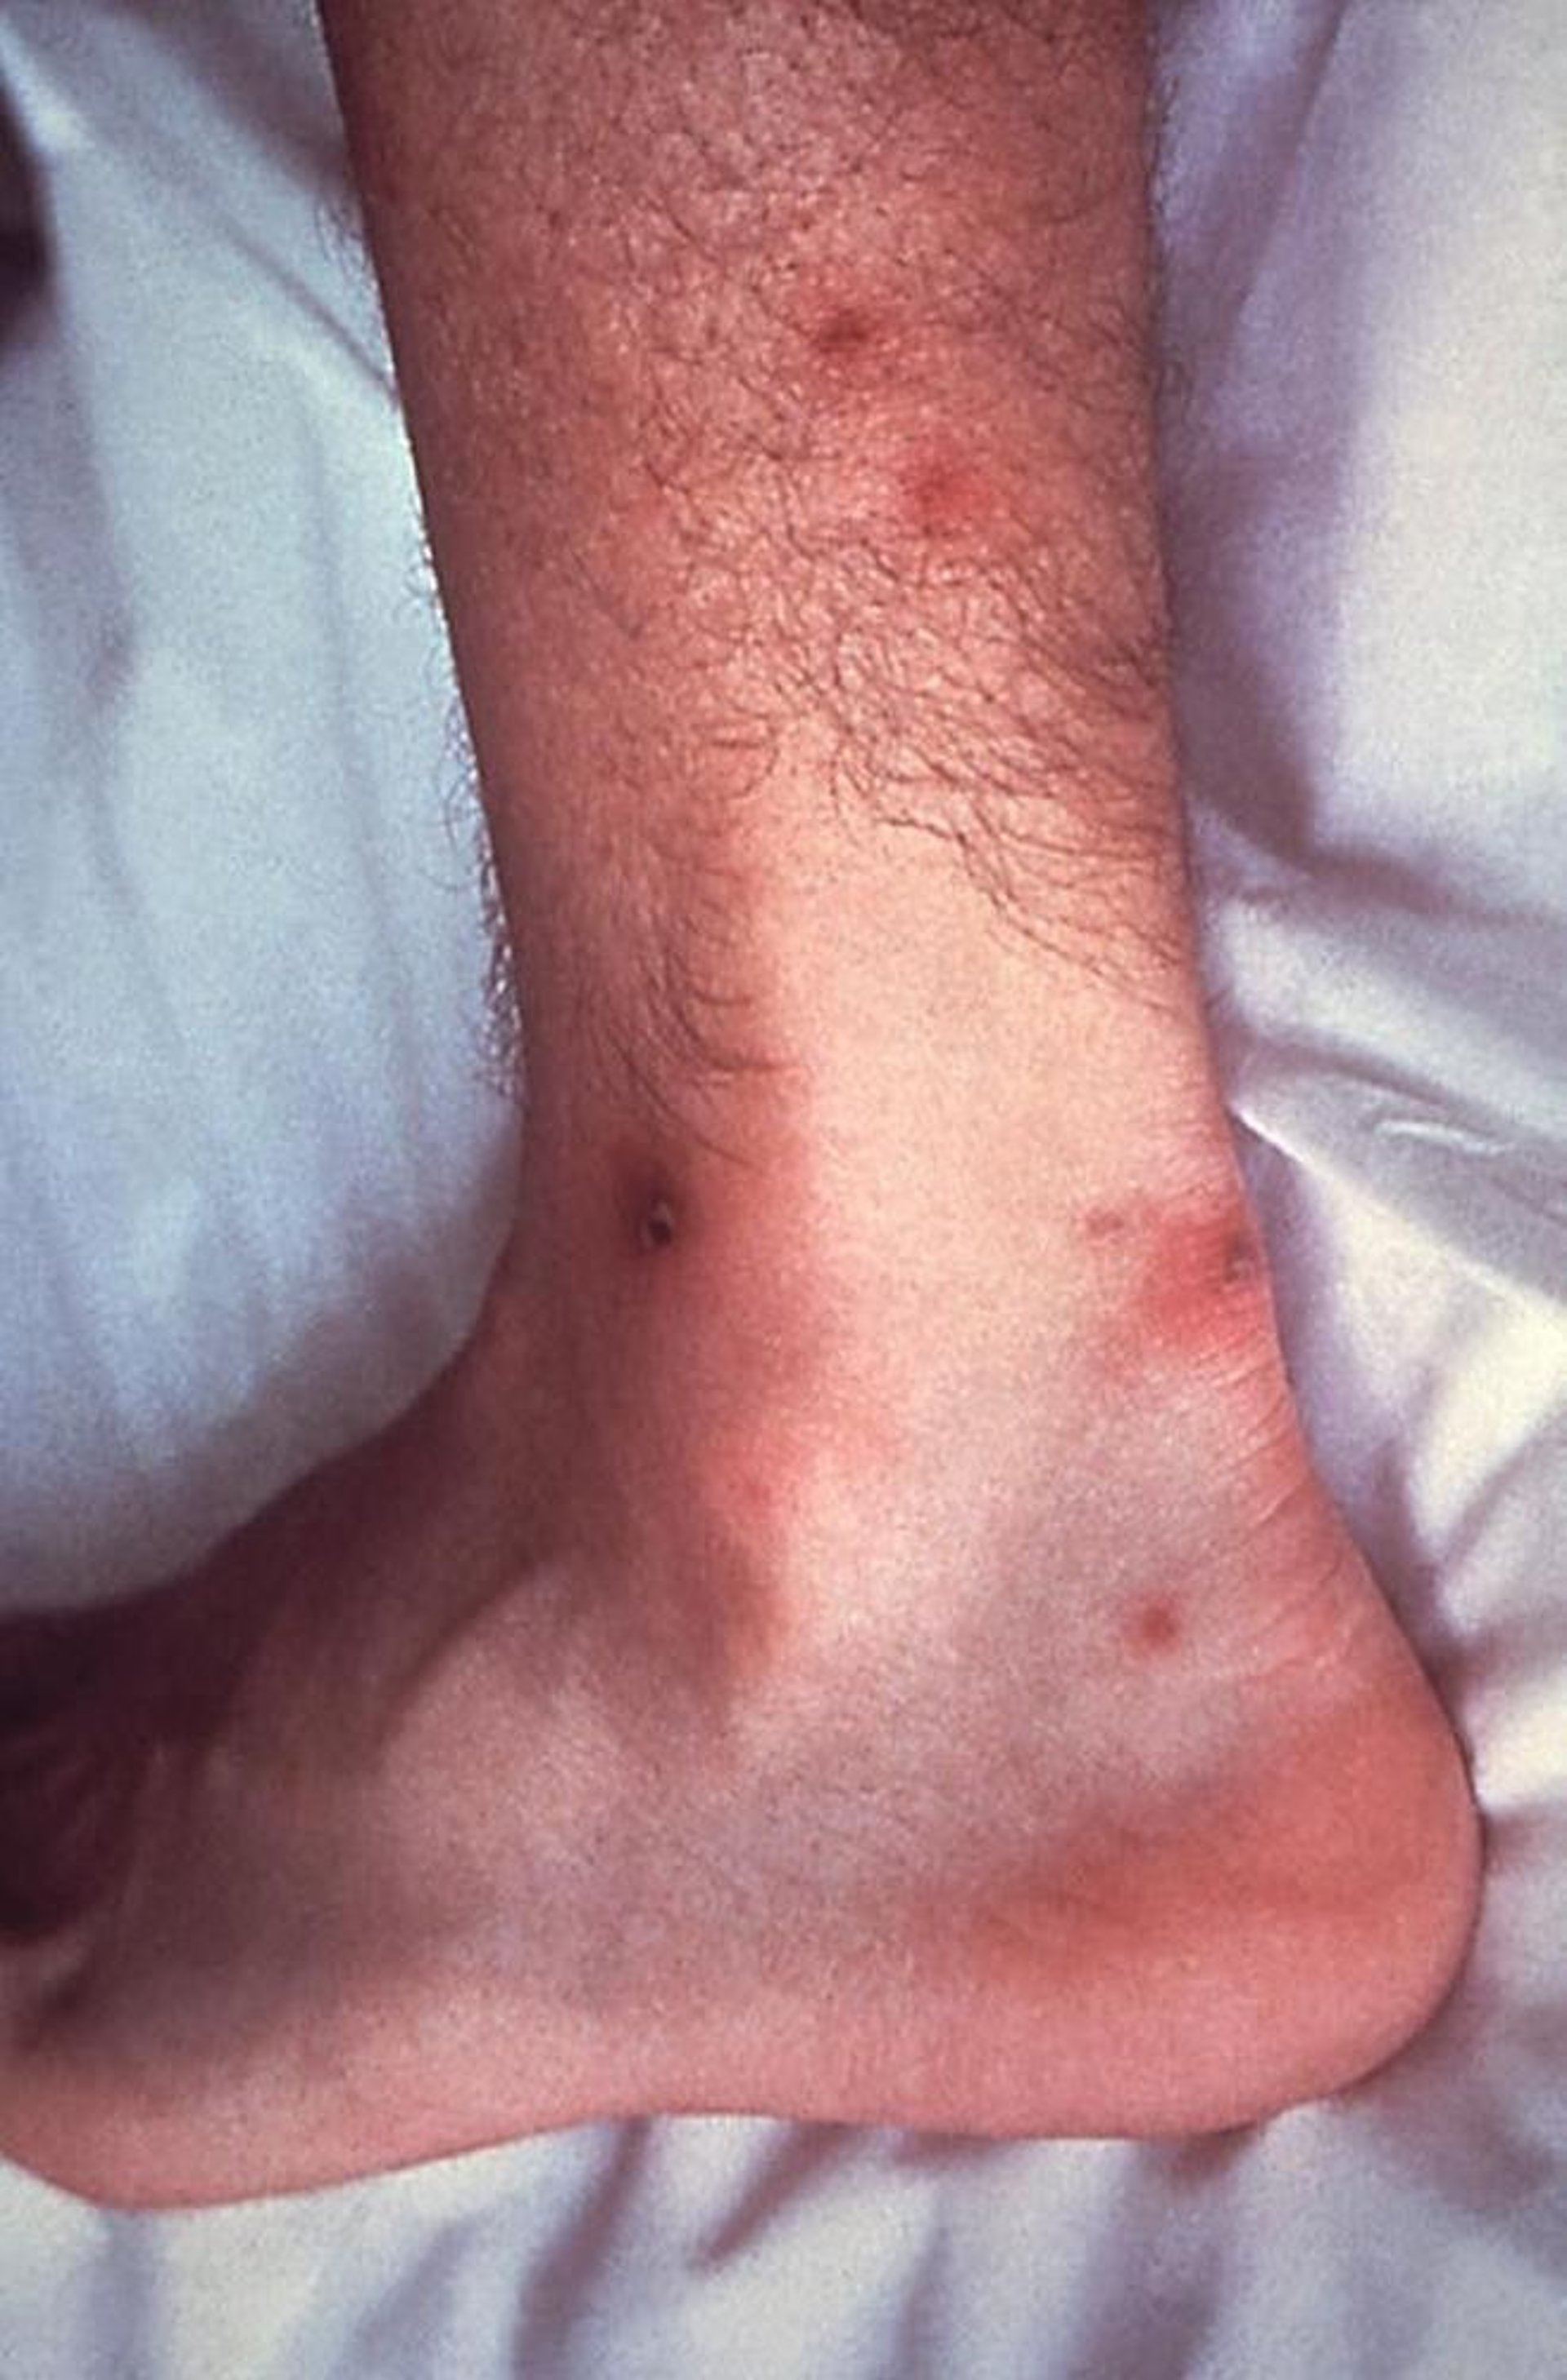 Disseminated Gonococcal Infection Affecting the Skin